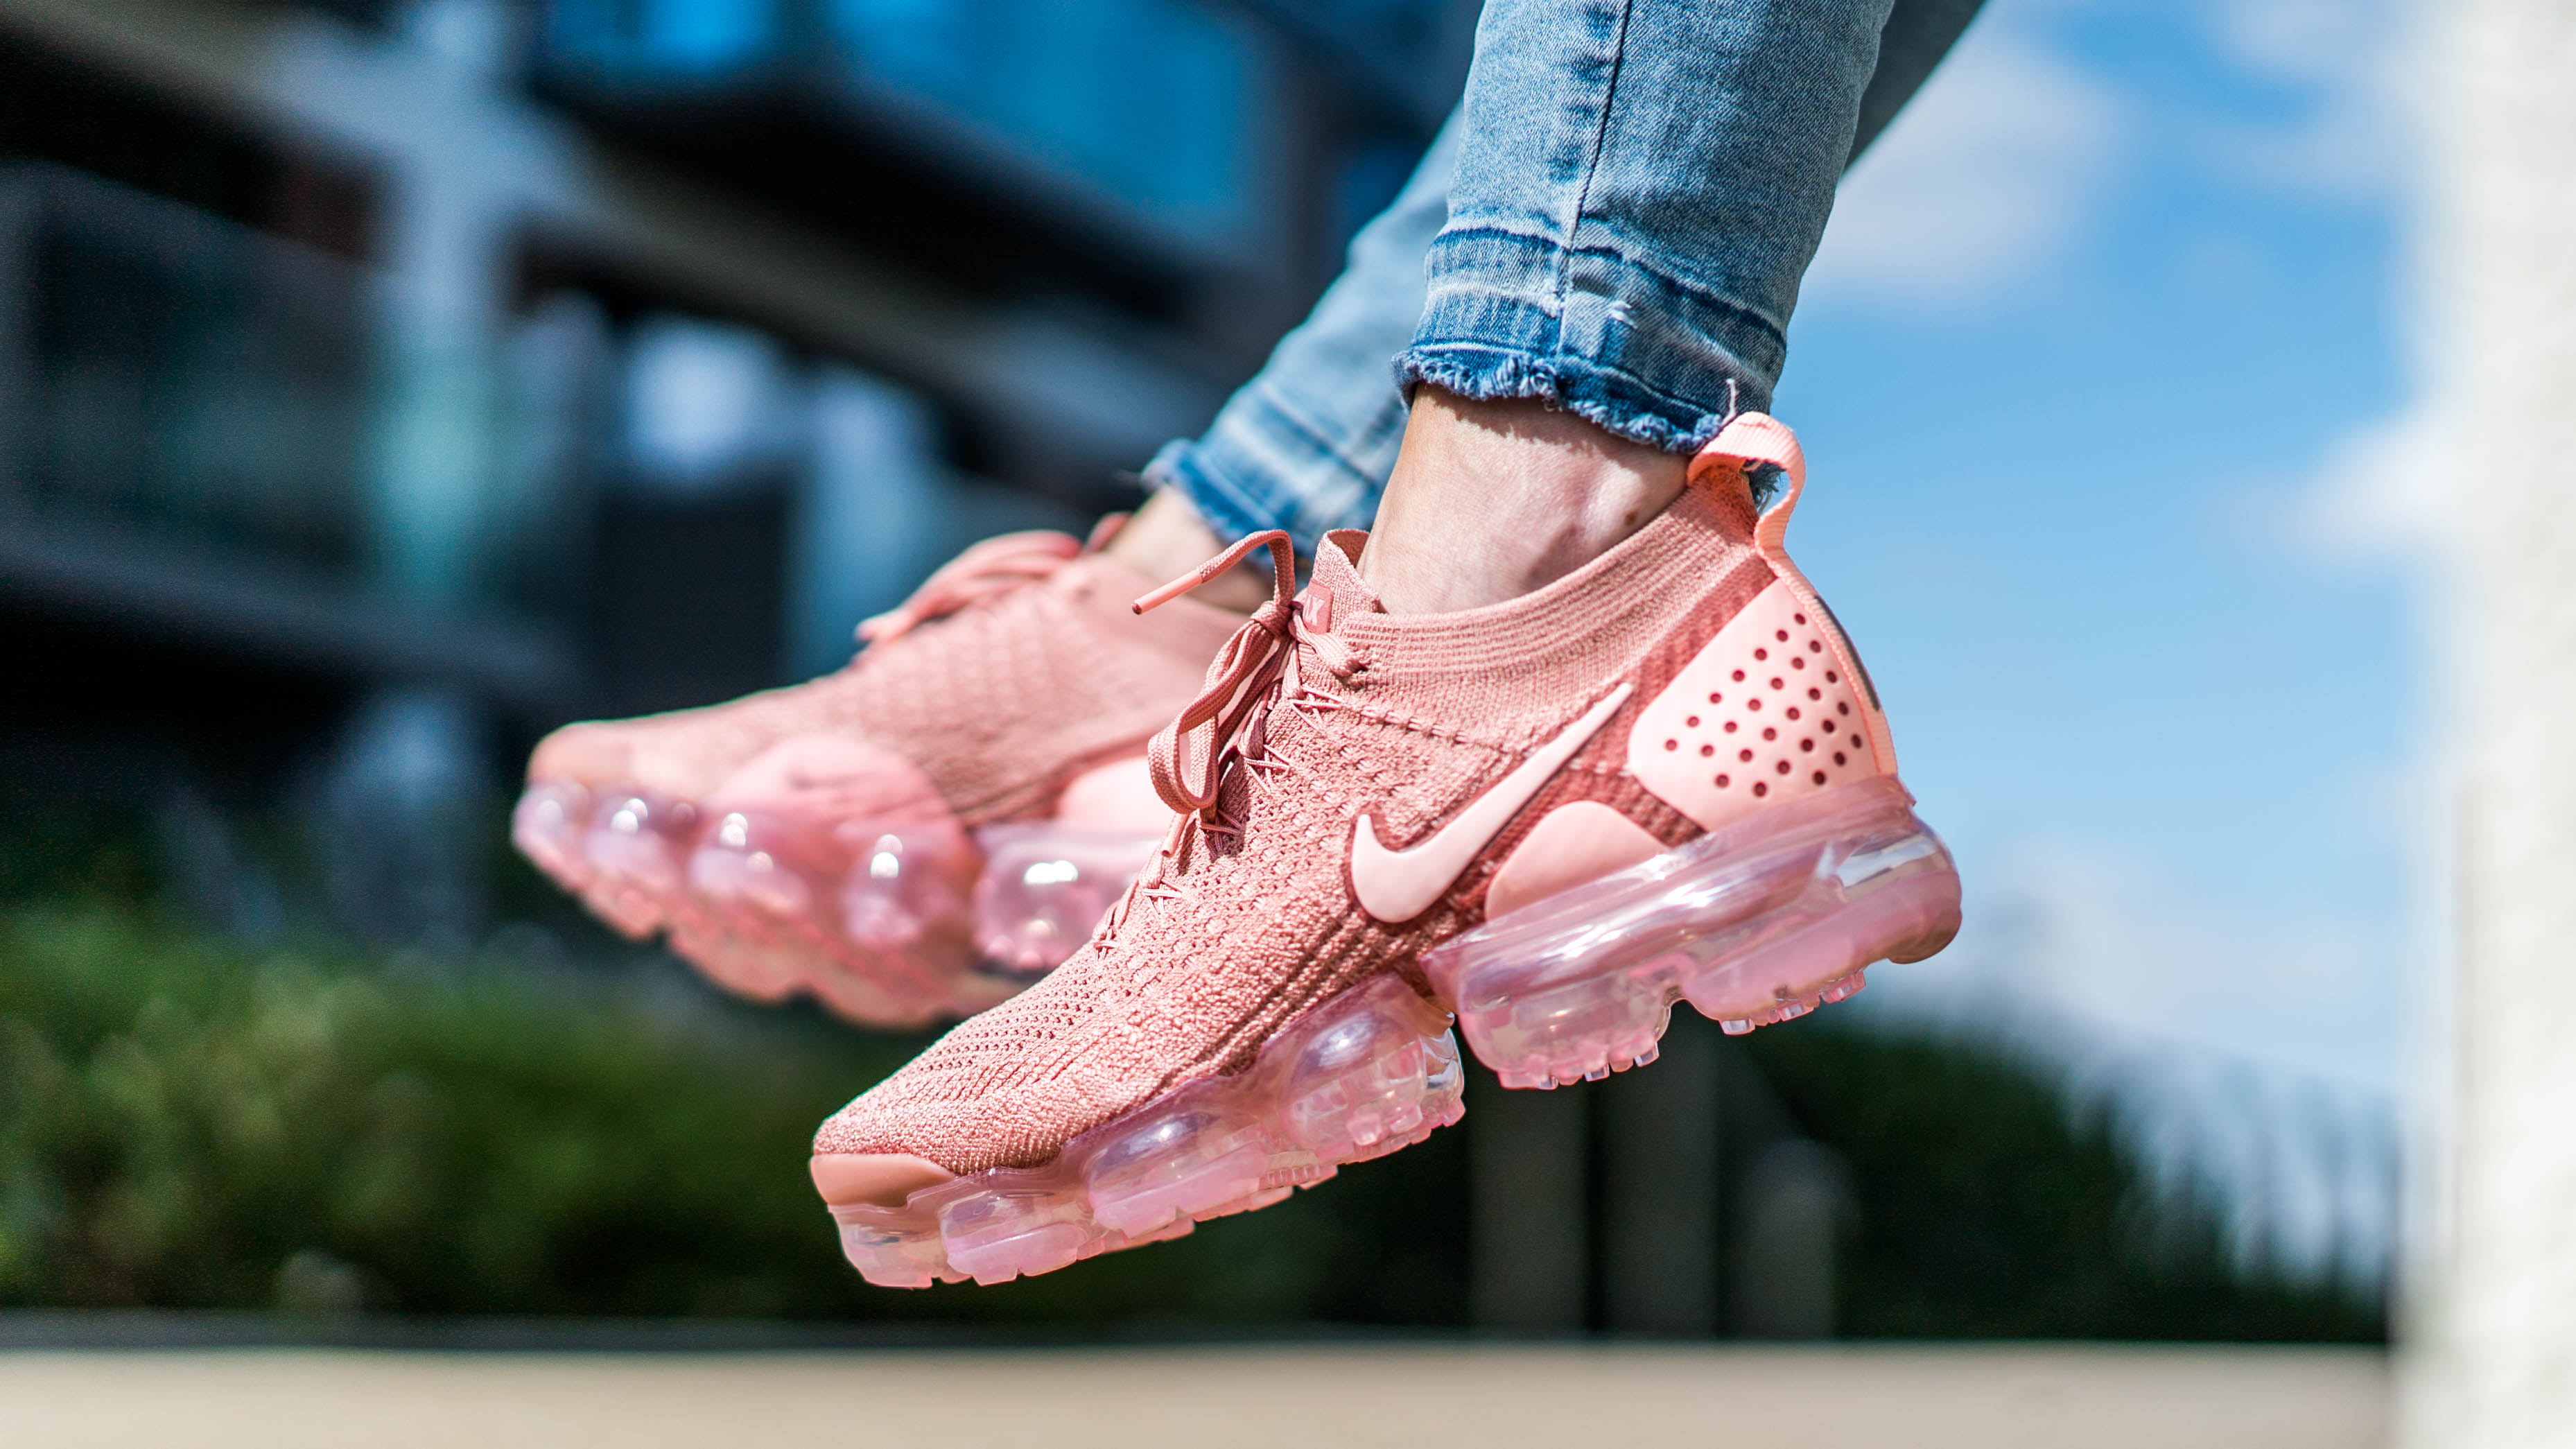 Paradoja Sermón compromiso The Sole Womens al Twitter: "An Exclusive On Foot Look At The Nike Air VaporMax  Flyknit 2 In Rust Pink 💕 https://t.co/JFpl1r2F9R https://t.co/6drRISHukU"  / Twitter